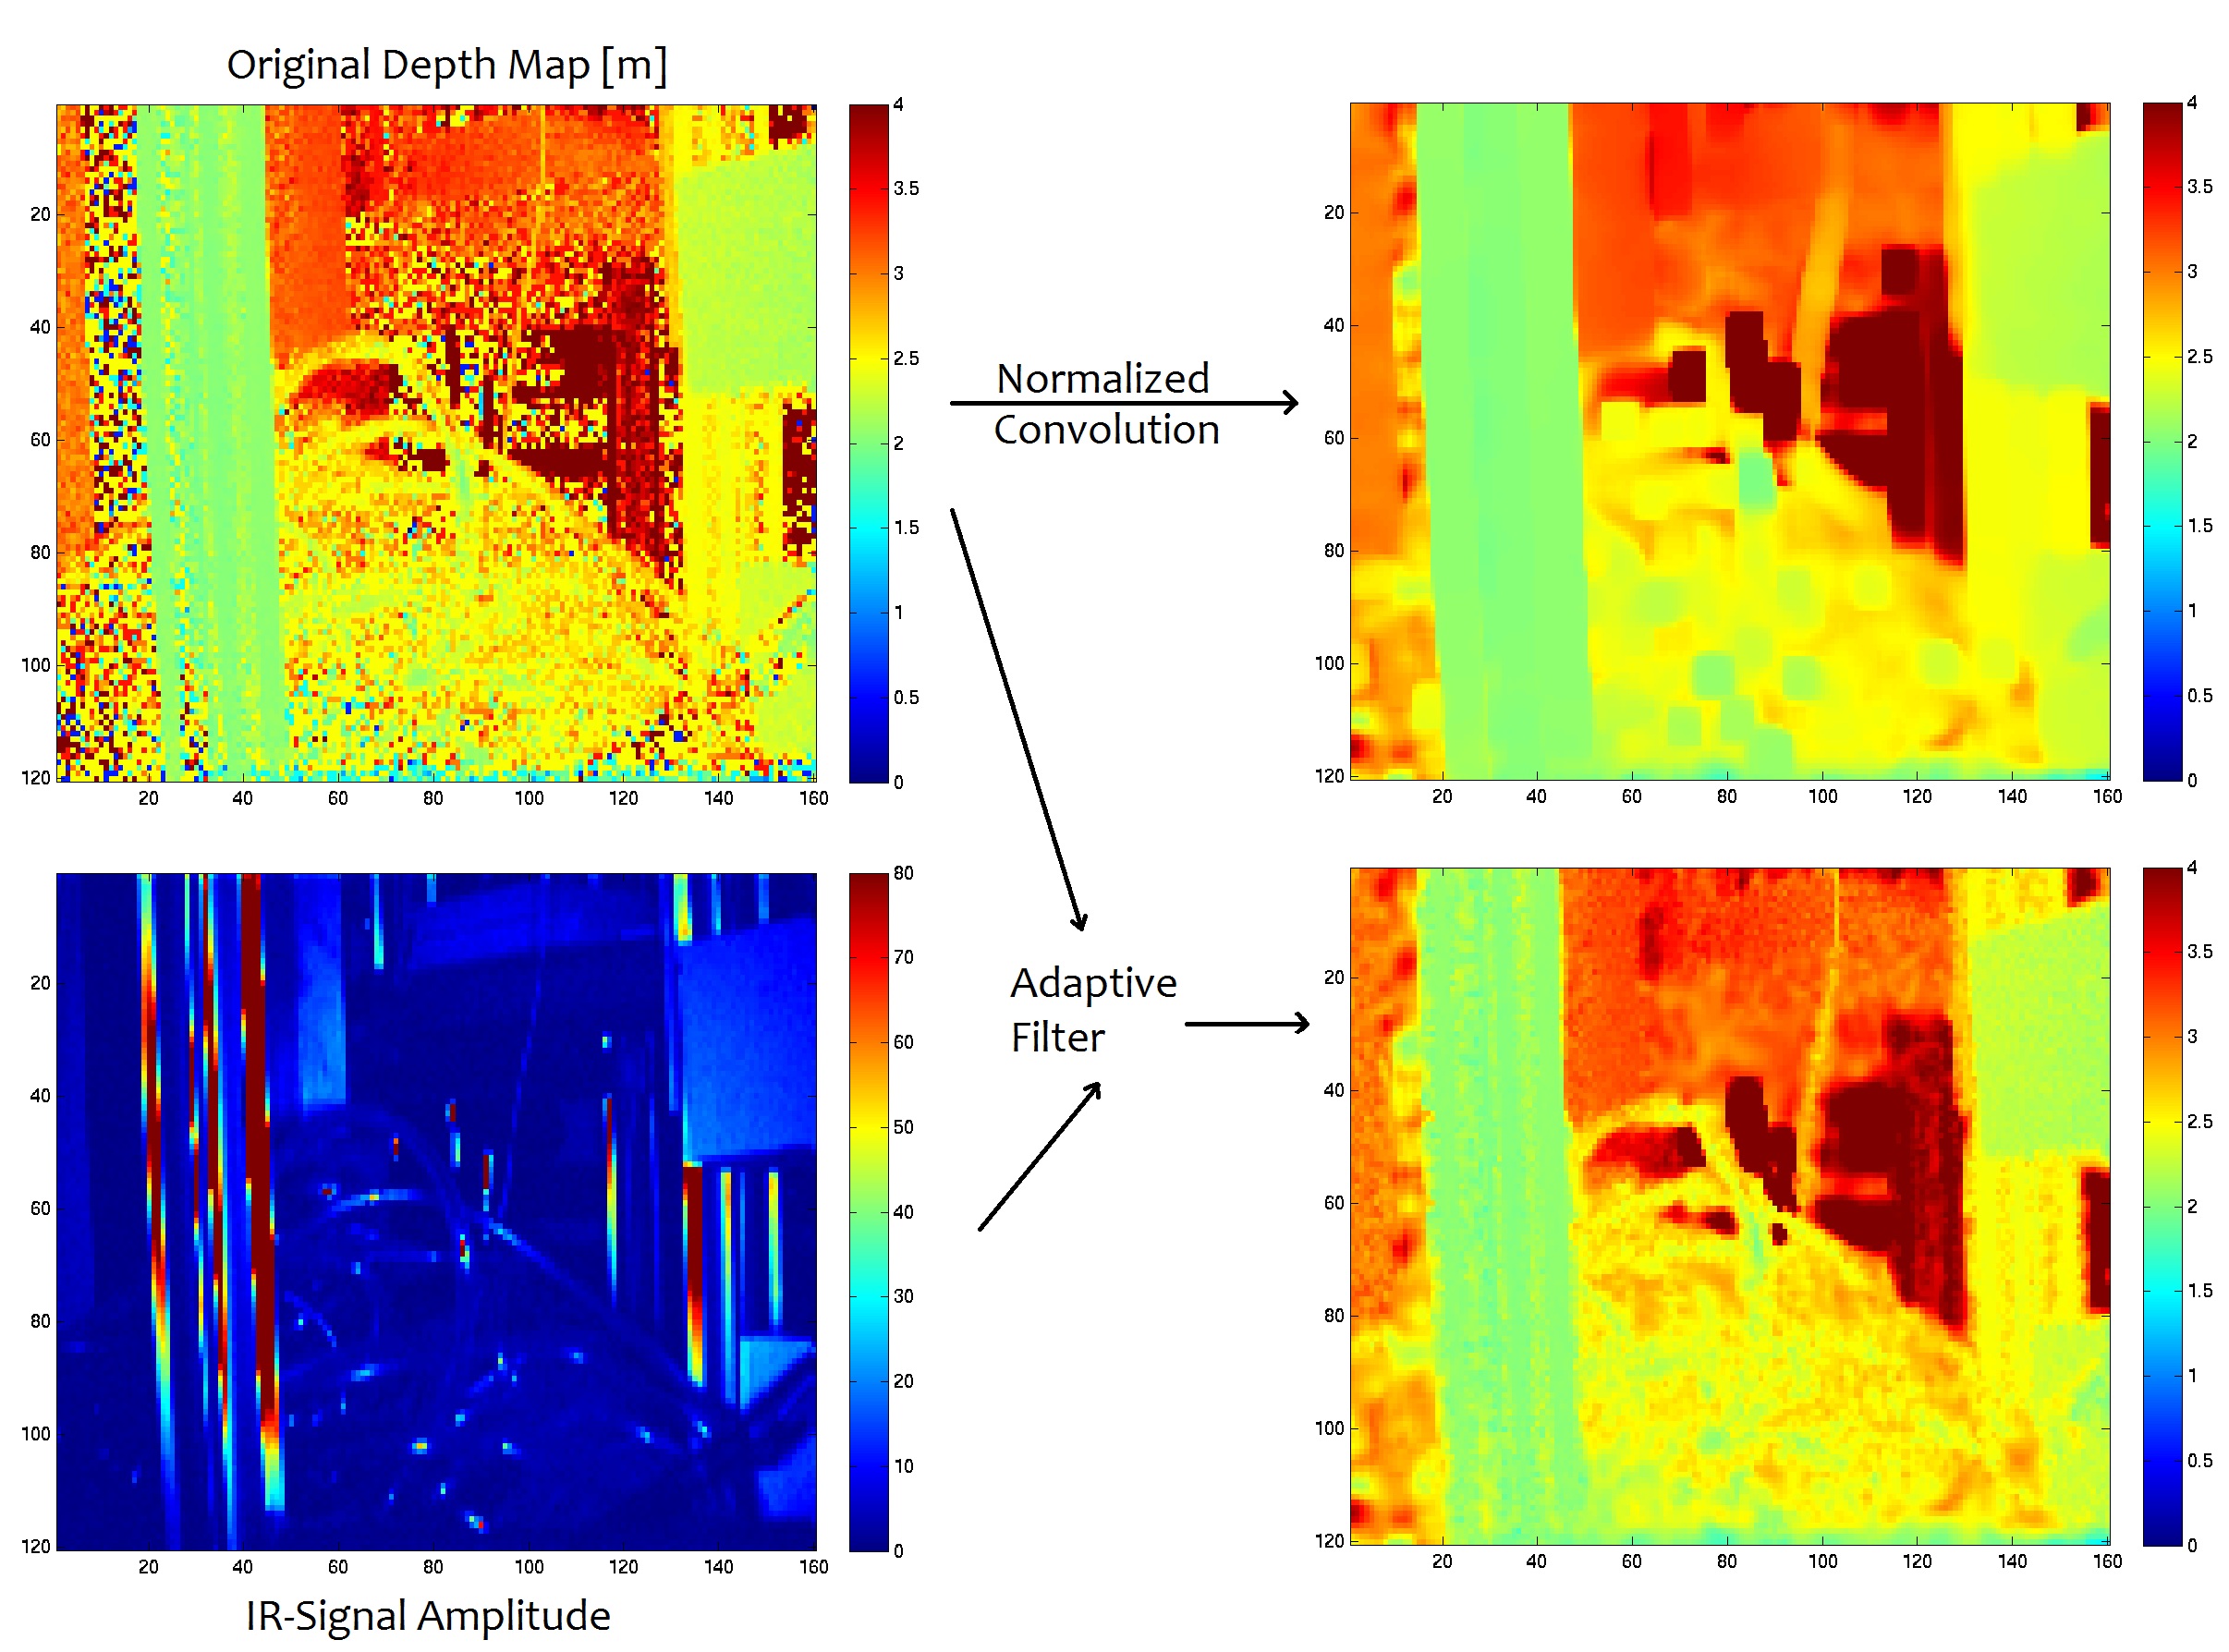 Adaptive Filter vs. Normalized Convolution with fixed width